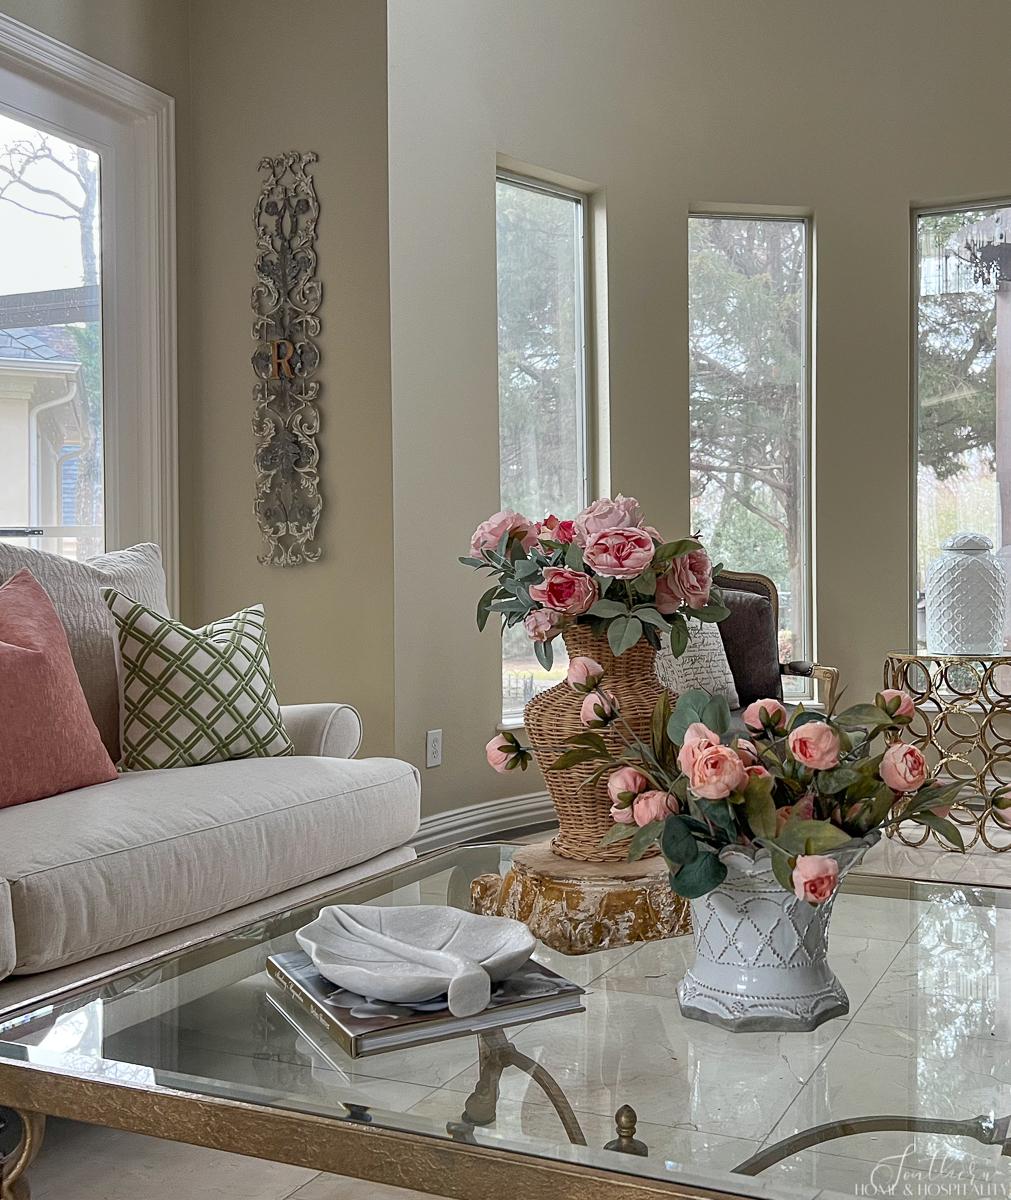 Nine Easy Ways to Decorate for Early Spring